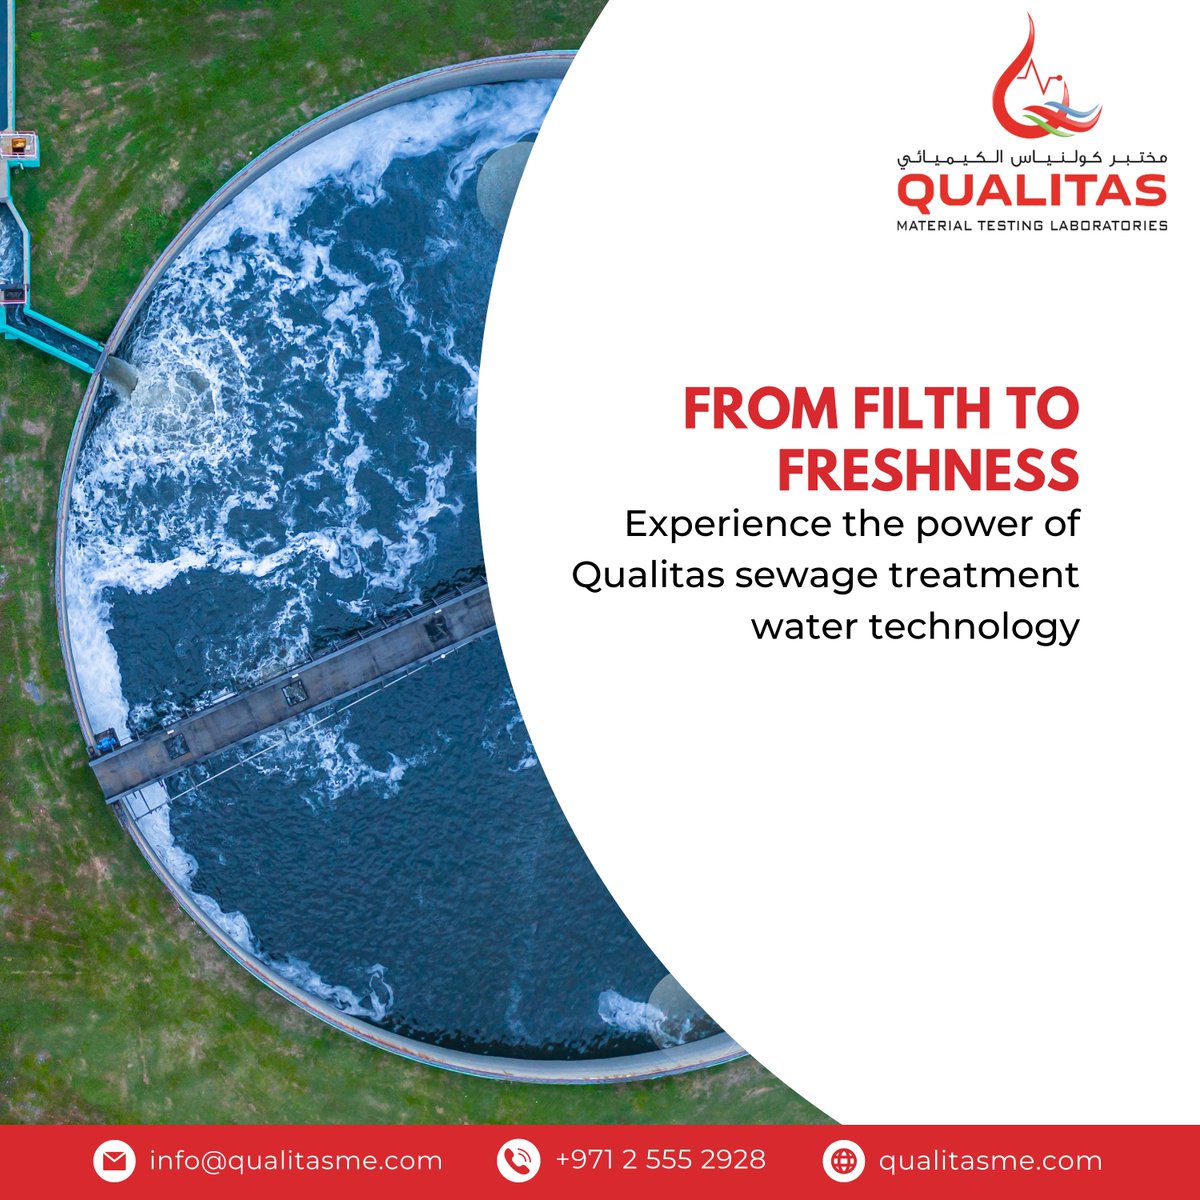 Embrace the Transformation: Discover the Magic of QualitasME's Sewage Treatment Water Technology. 💦✨

Visit us at - qualitasme.com
.
.
#QualitasME #QualityAssurance #ComplianceMatters #OptimizedPerformance #SustainableSolutions #TrustedResults #WaterConservation